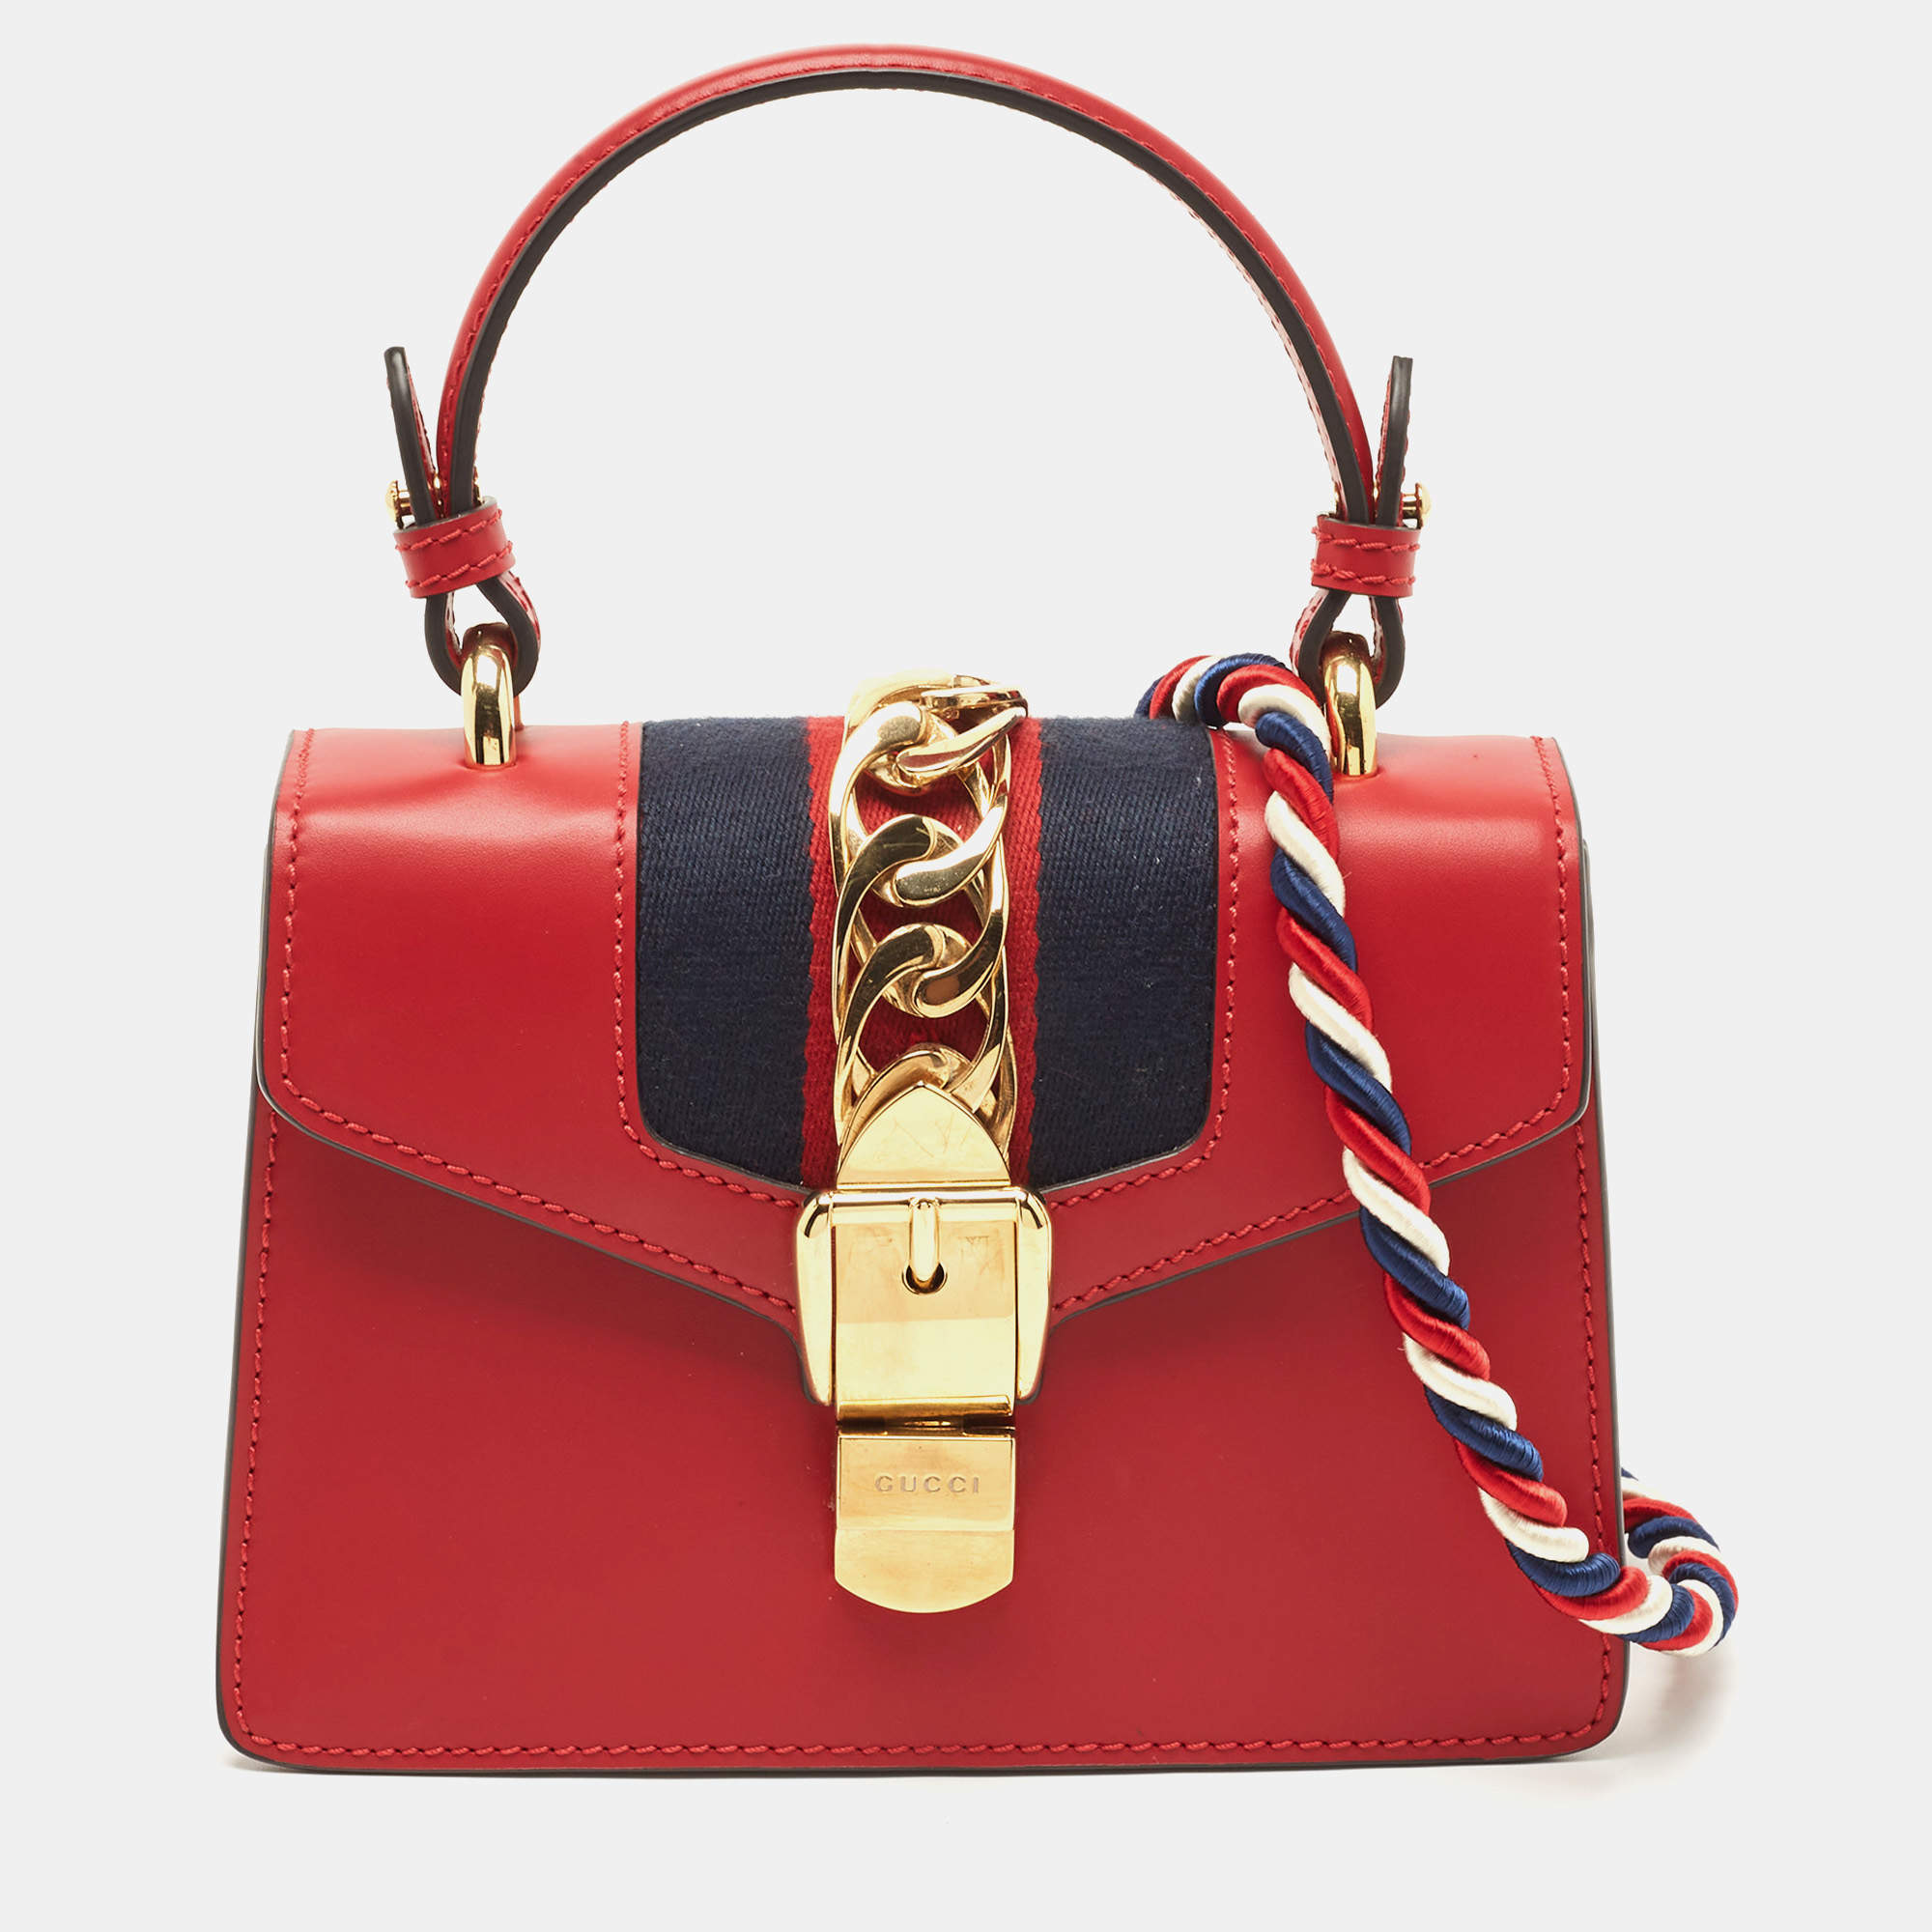 gucci red bag price